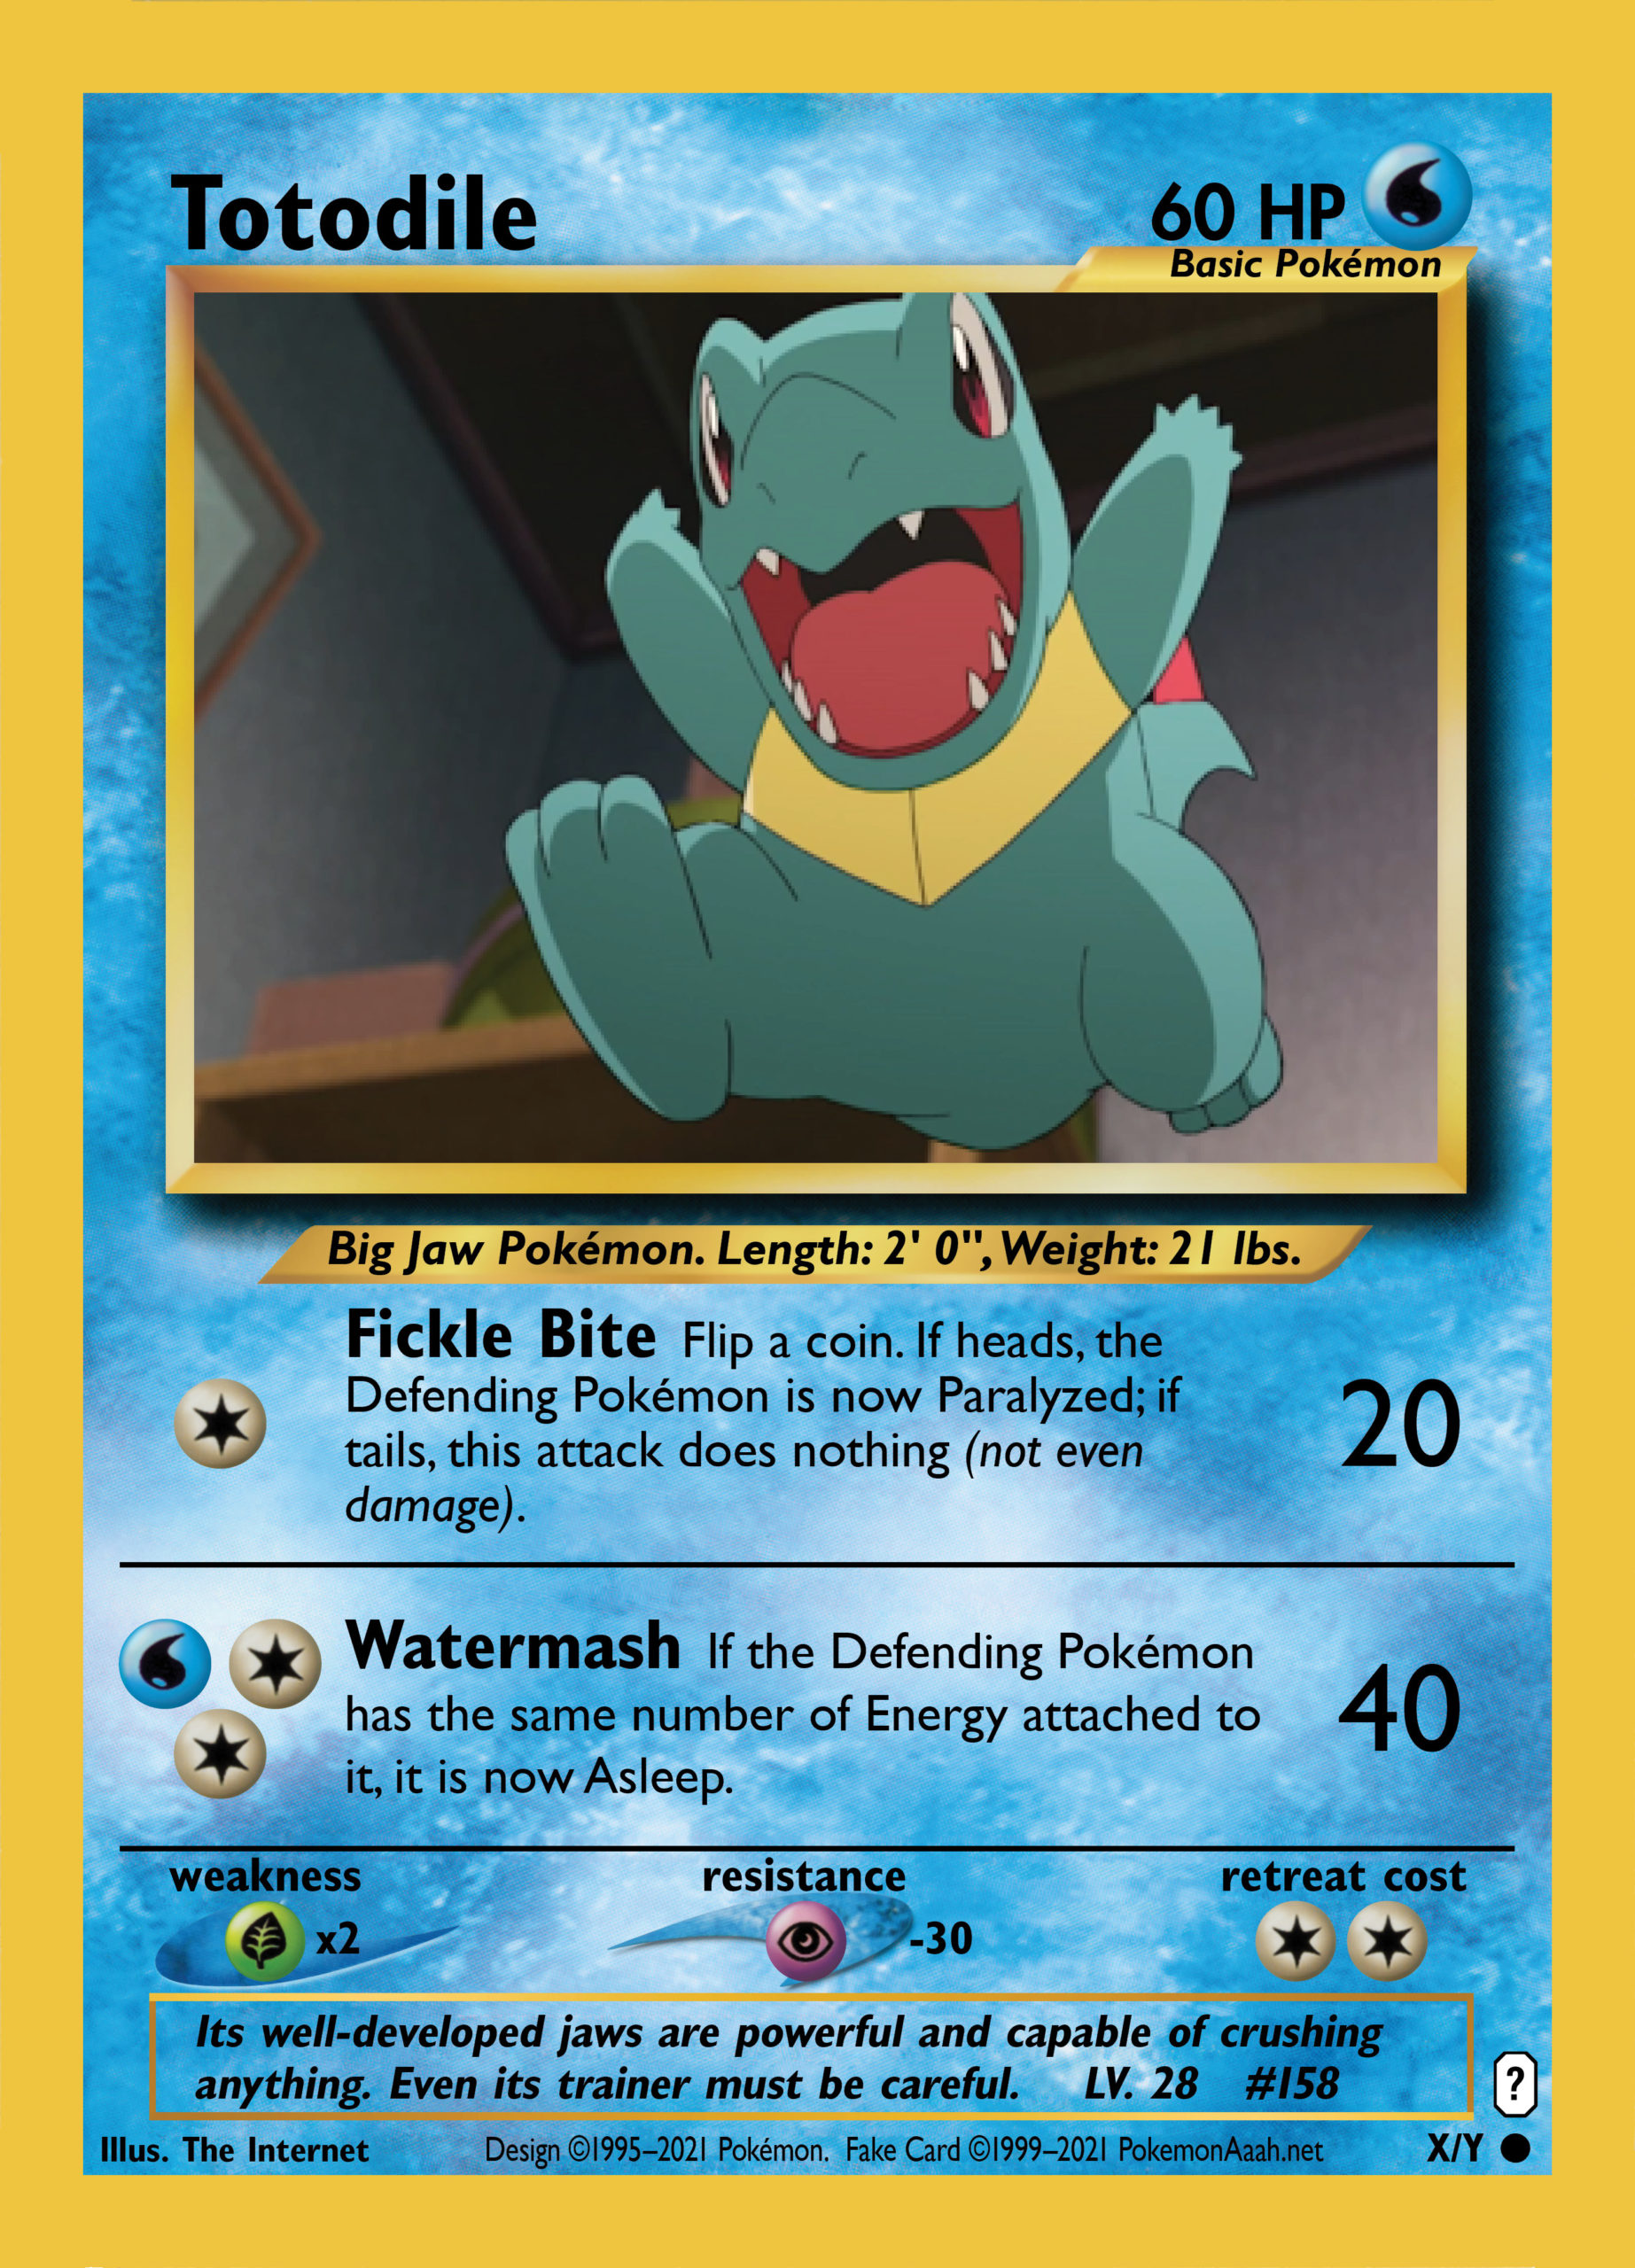 Raw exported image of a test Totodile fake card